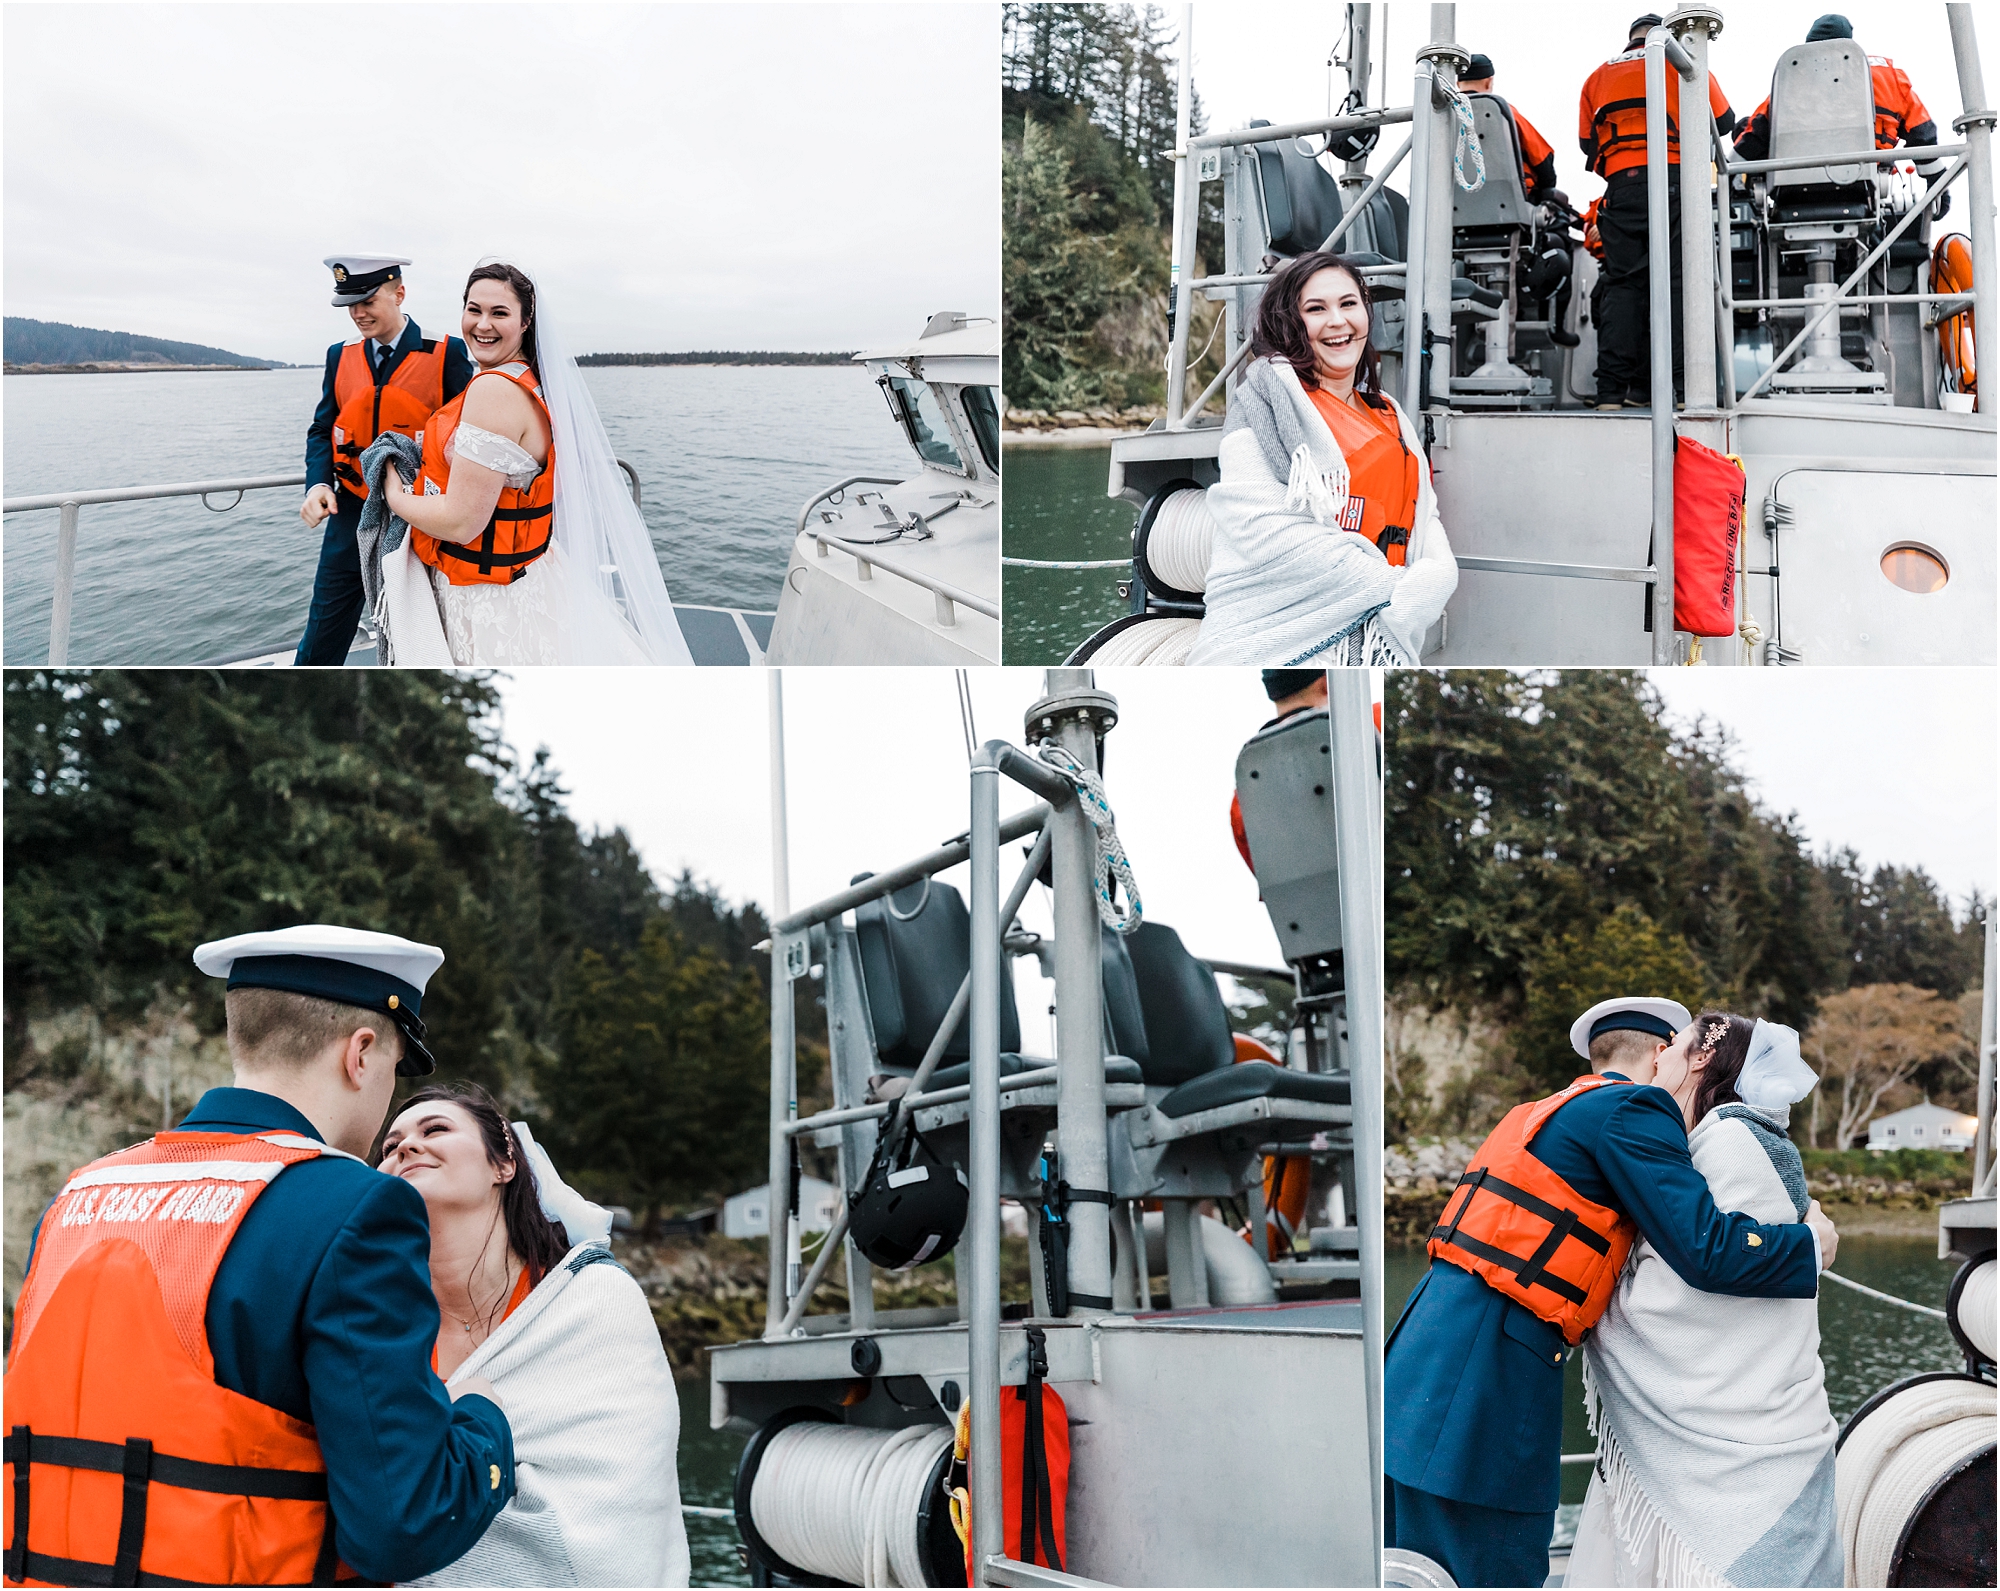 A bride and groom, both wearing bright orange life jackets, ride on the deck of a US Coast Guard ship as we portage out to sea for their adventure elopement in Oregon. | Erica Swantek Photography